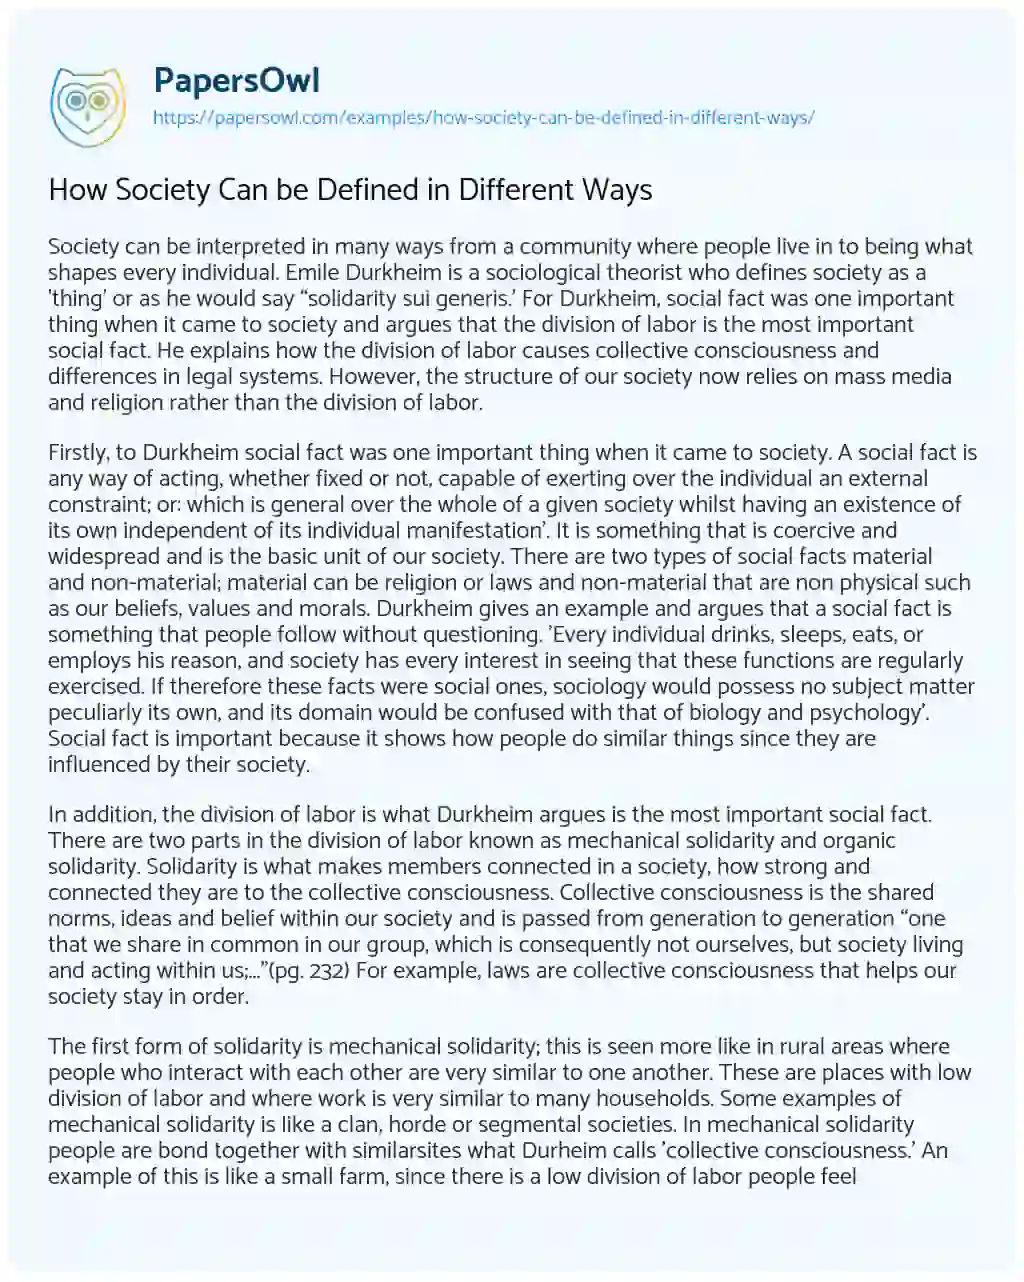 Essay on How Society Can be Defined in Different Ways